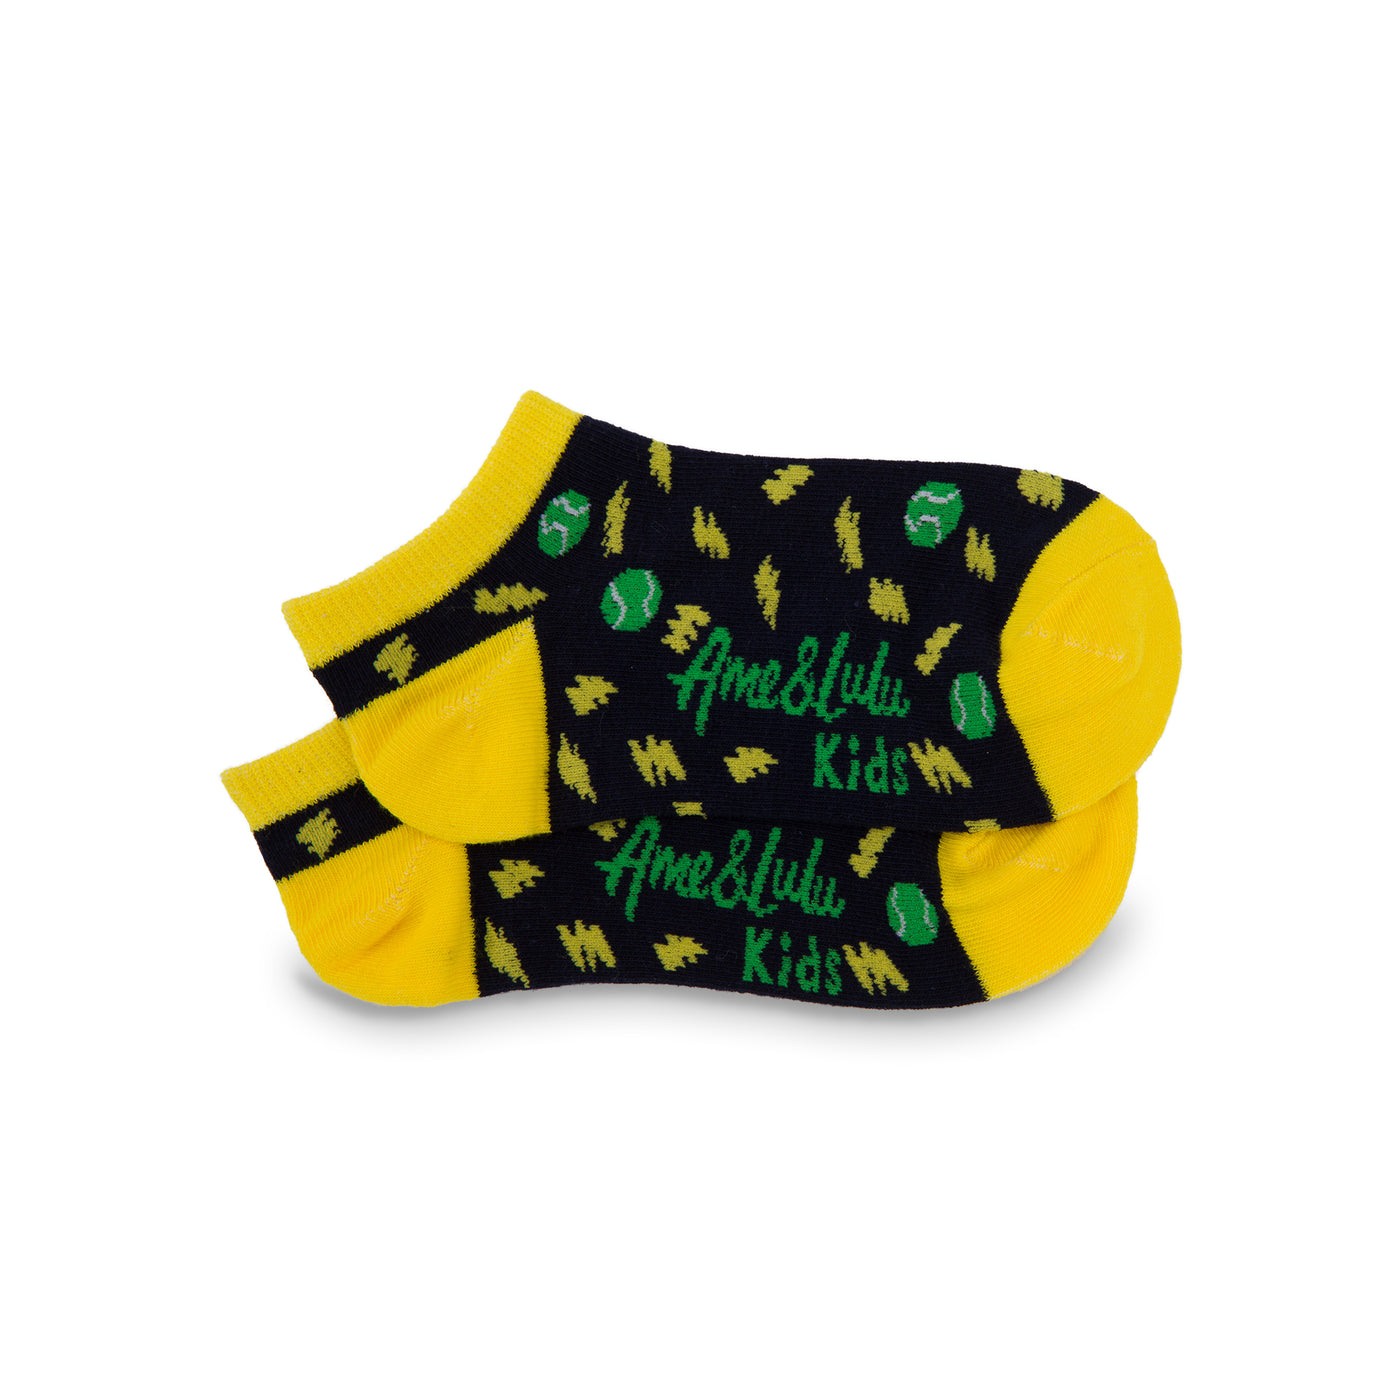 pair of navy kids socks with yellow heel and toes with lightning bolt and tennis ball pattern stitched on sock